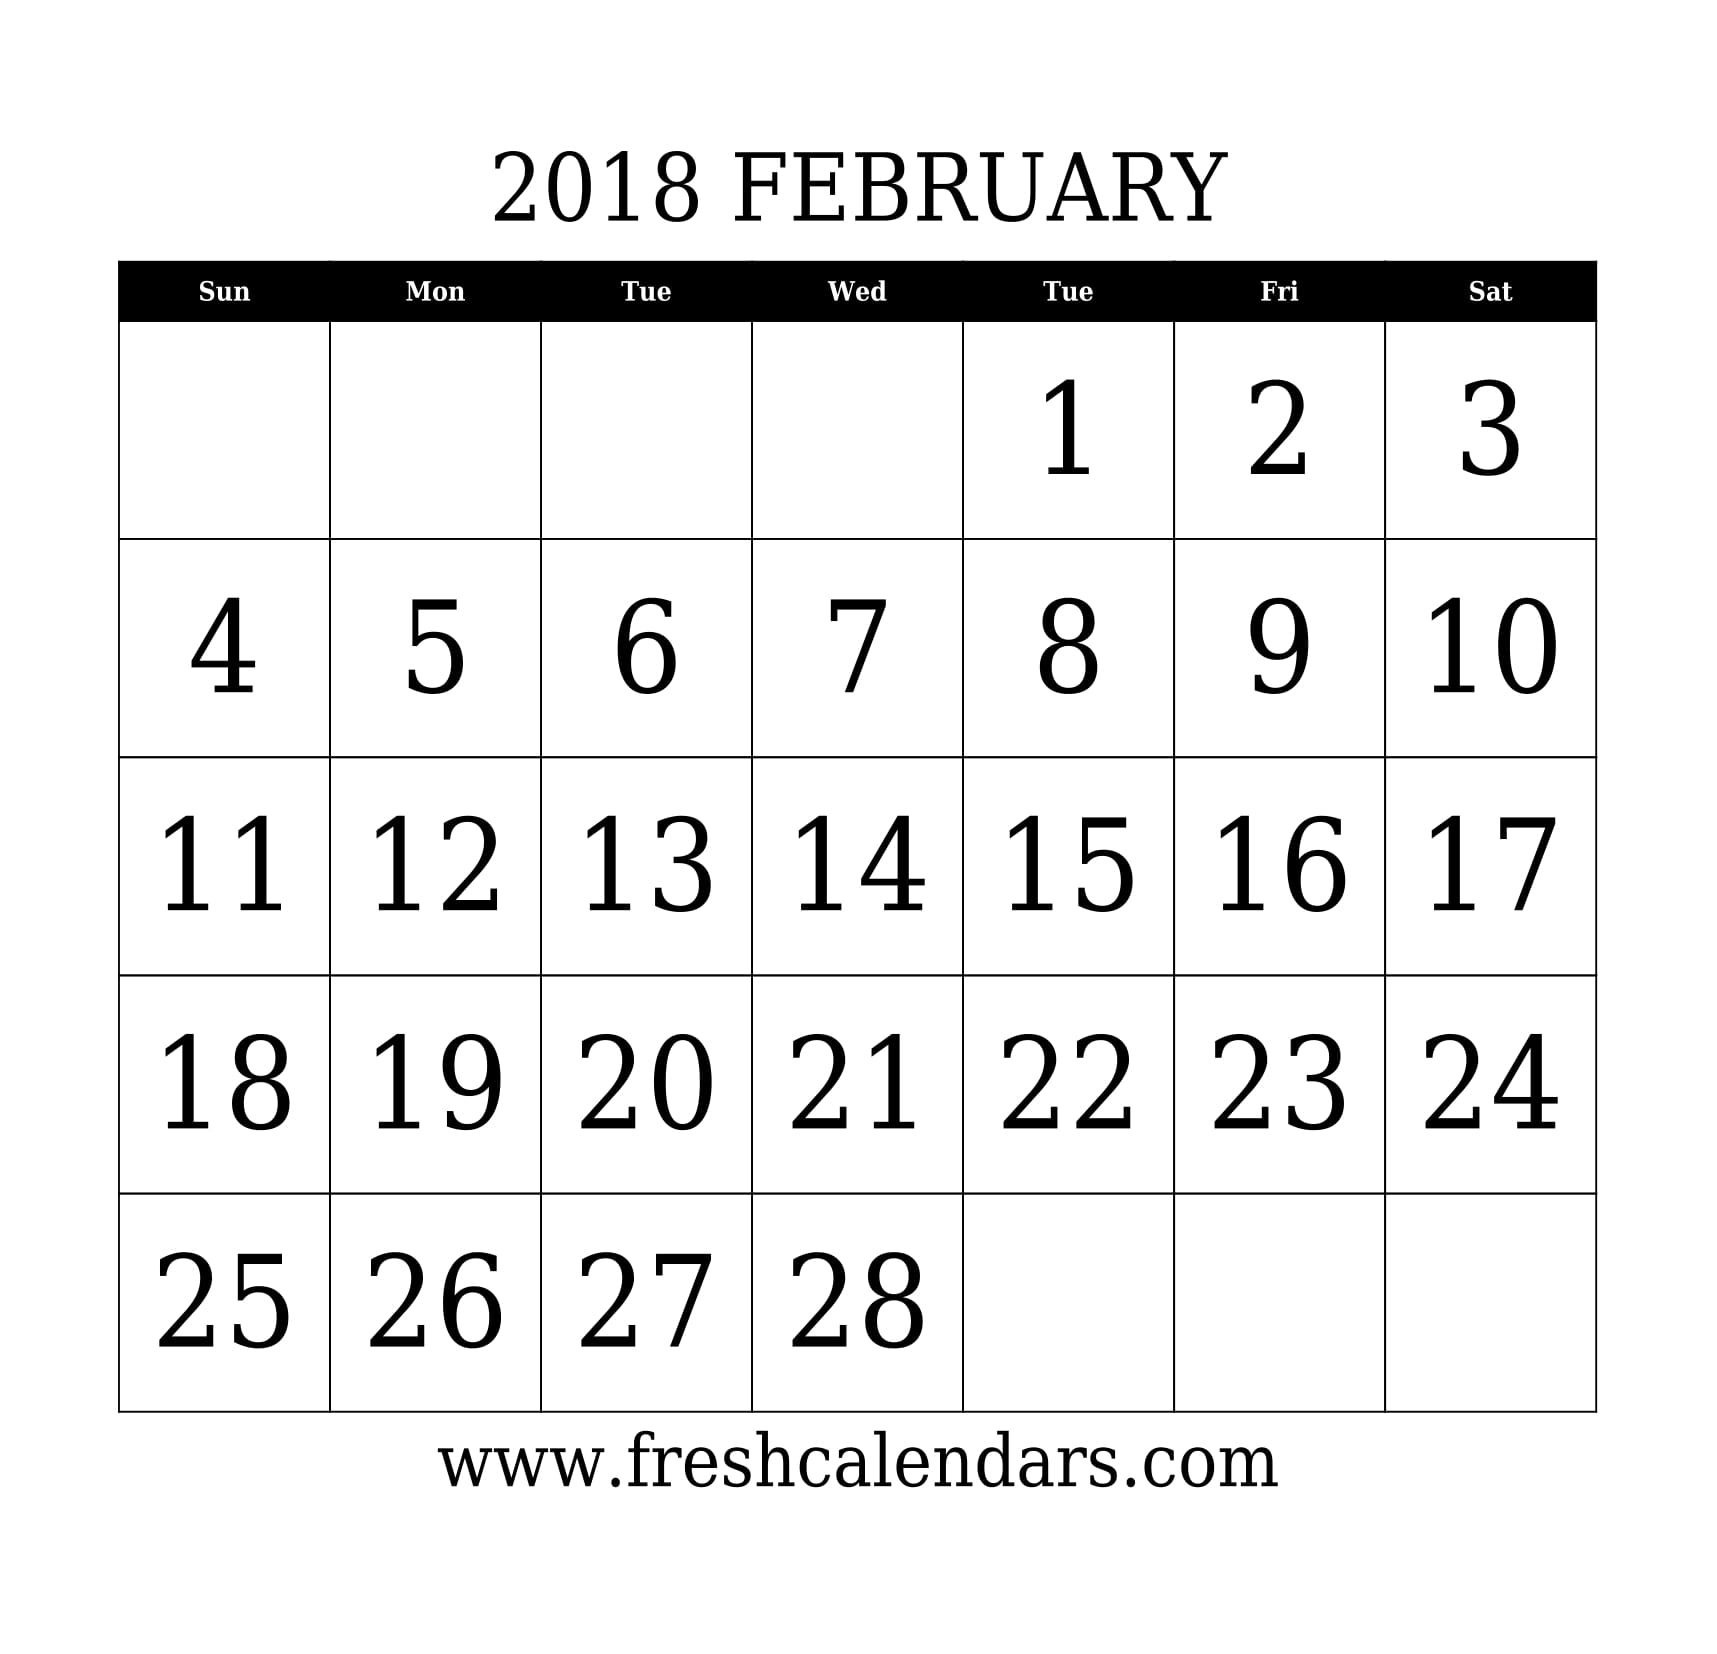 February 2018 Calendar With Large Dates